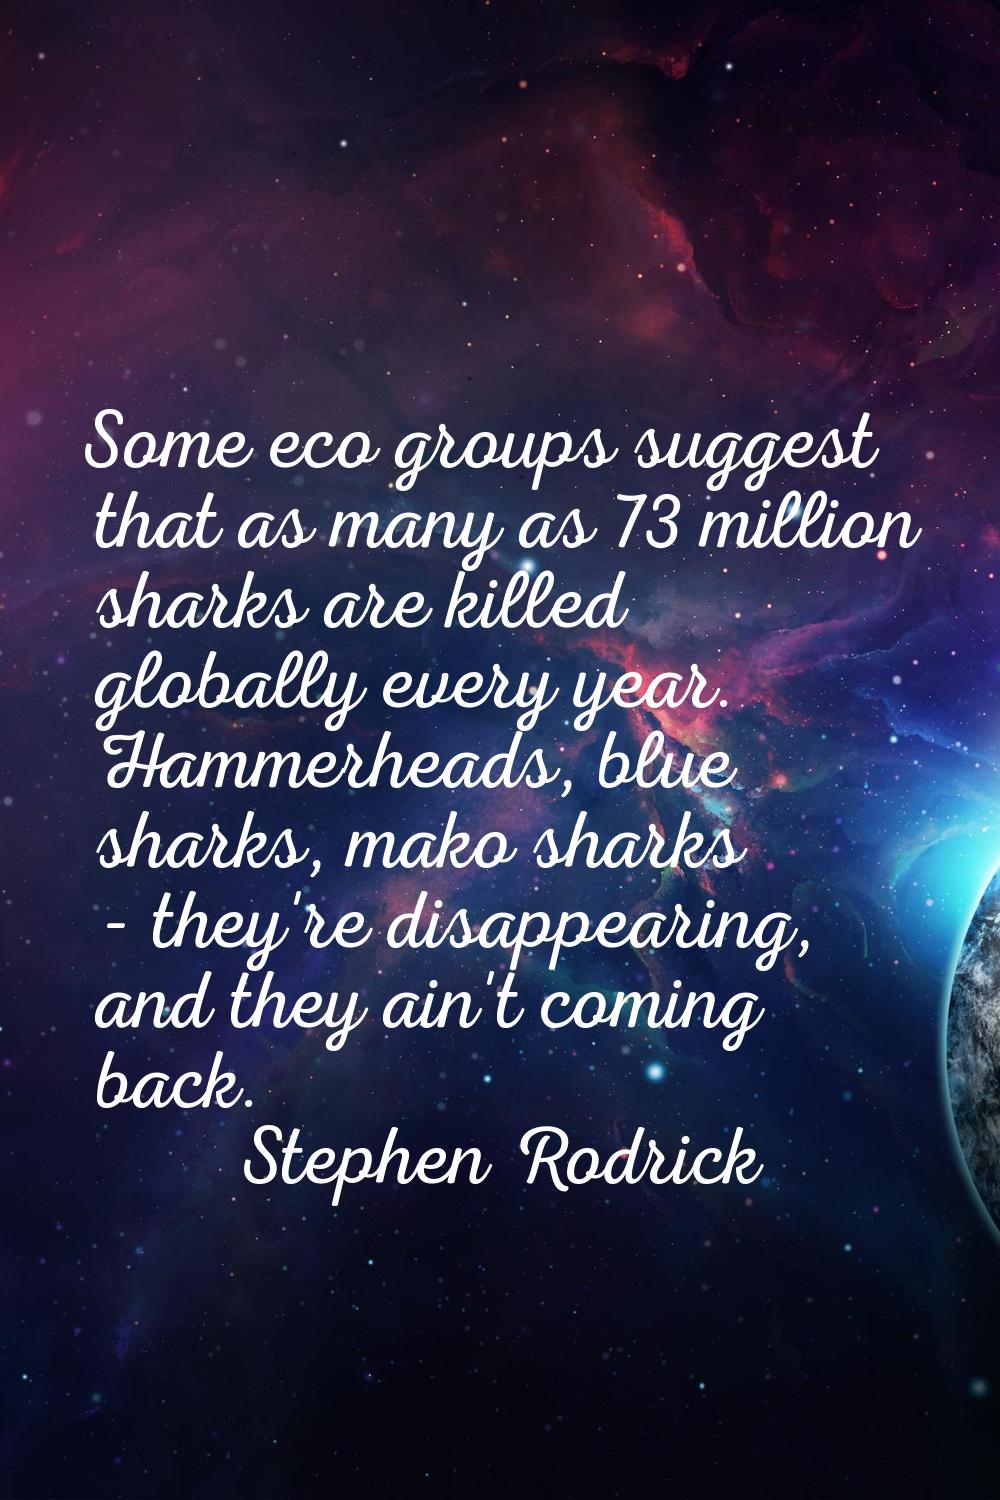 Some eco groups suggest that as many as 73 million sharks are killed globally every year. Hammerhea